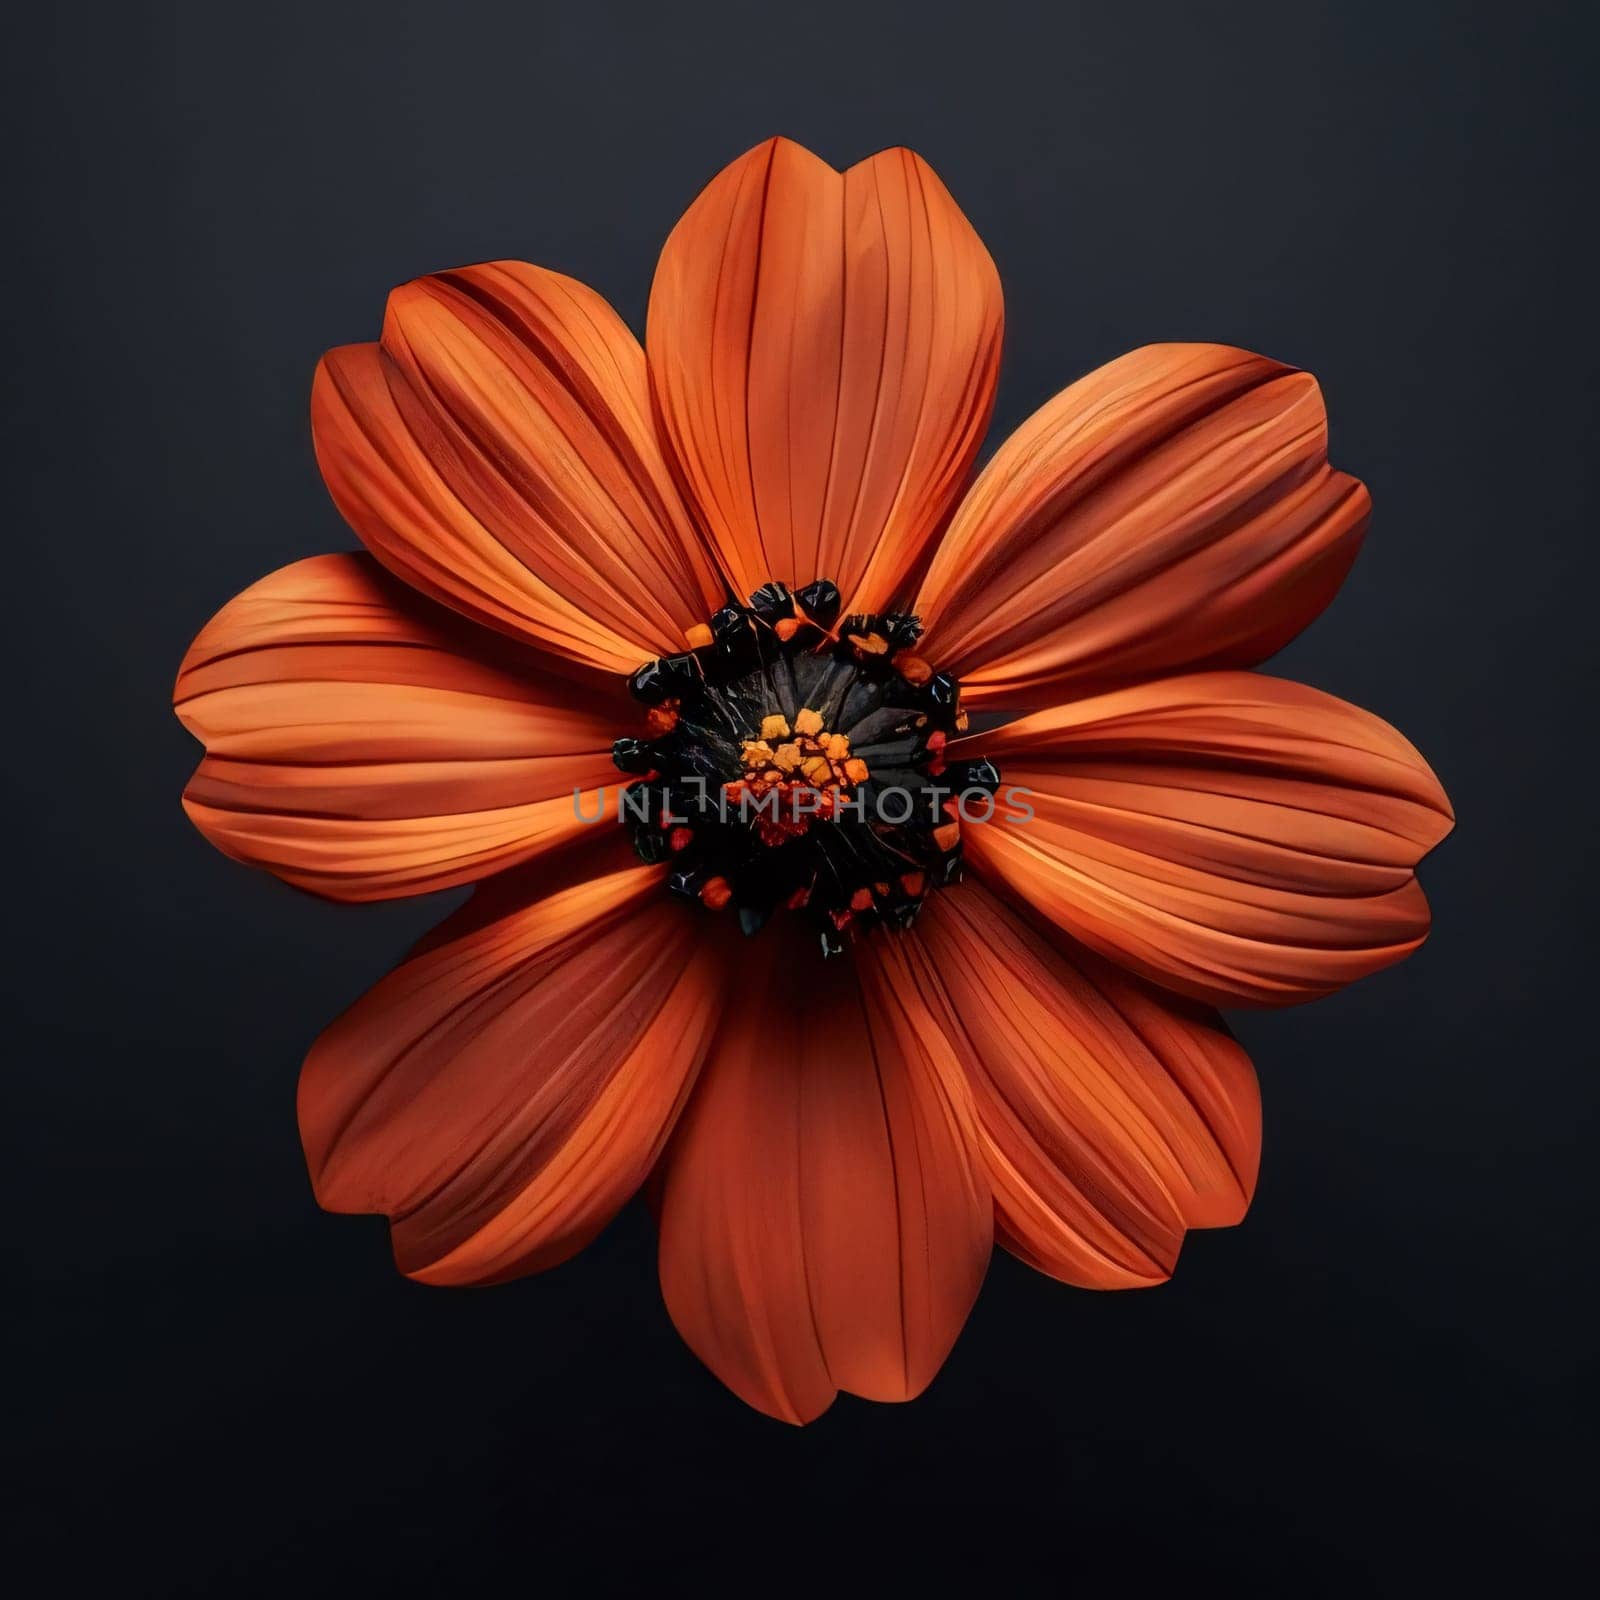 Orange flower with water drops isolated on black background. Flowering flowers, a symbol of spring, new life. A joyful time of nature waking up to life.